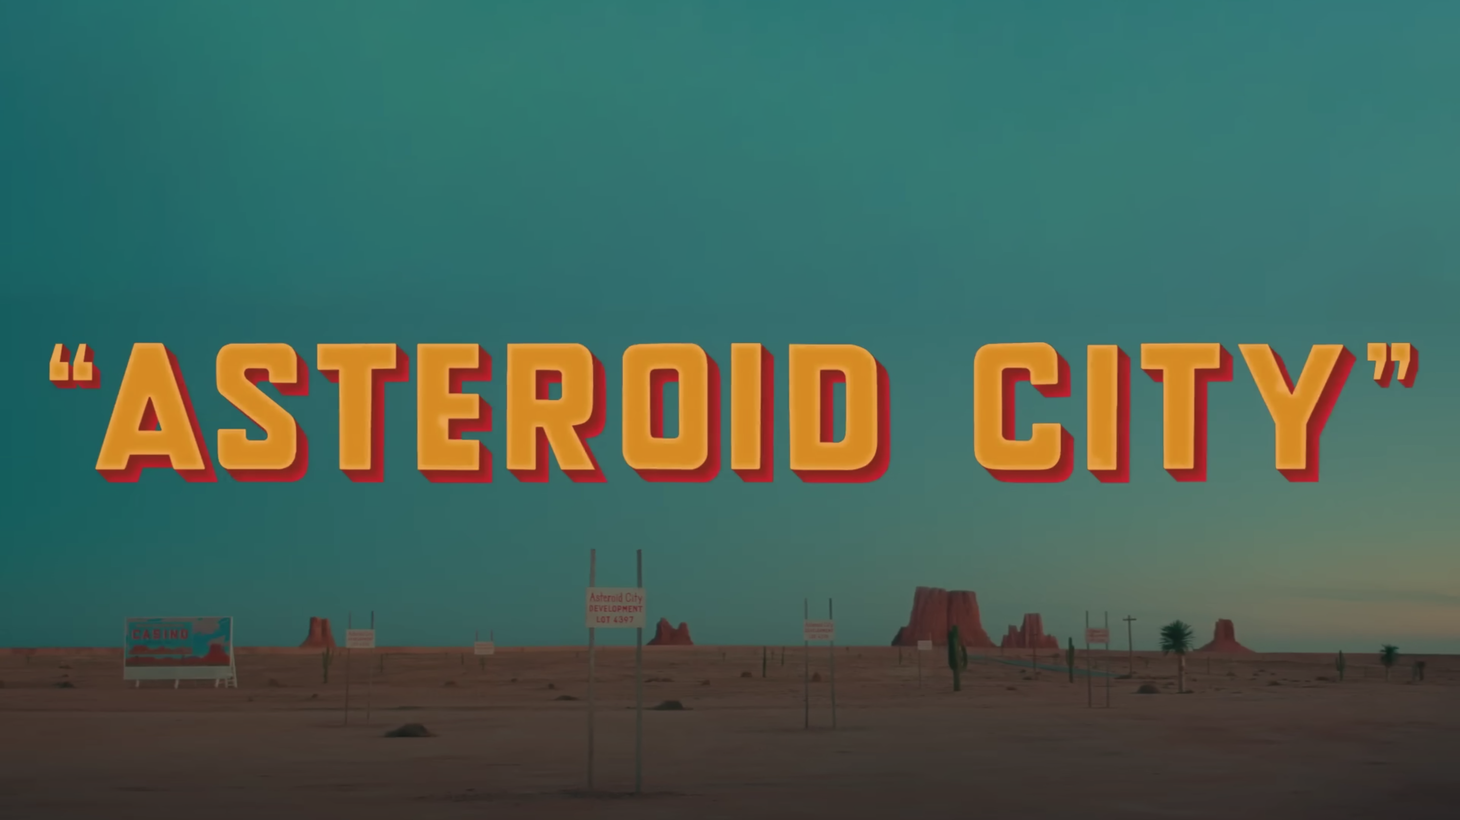 “Asteroid City” official trailer.